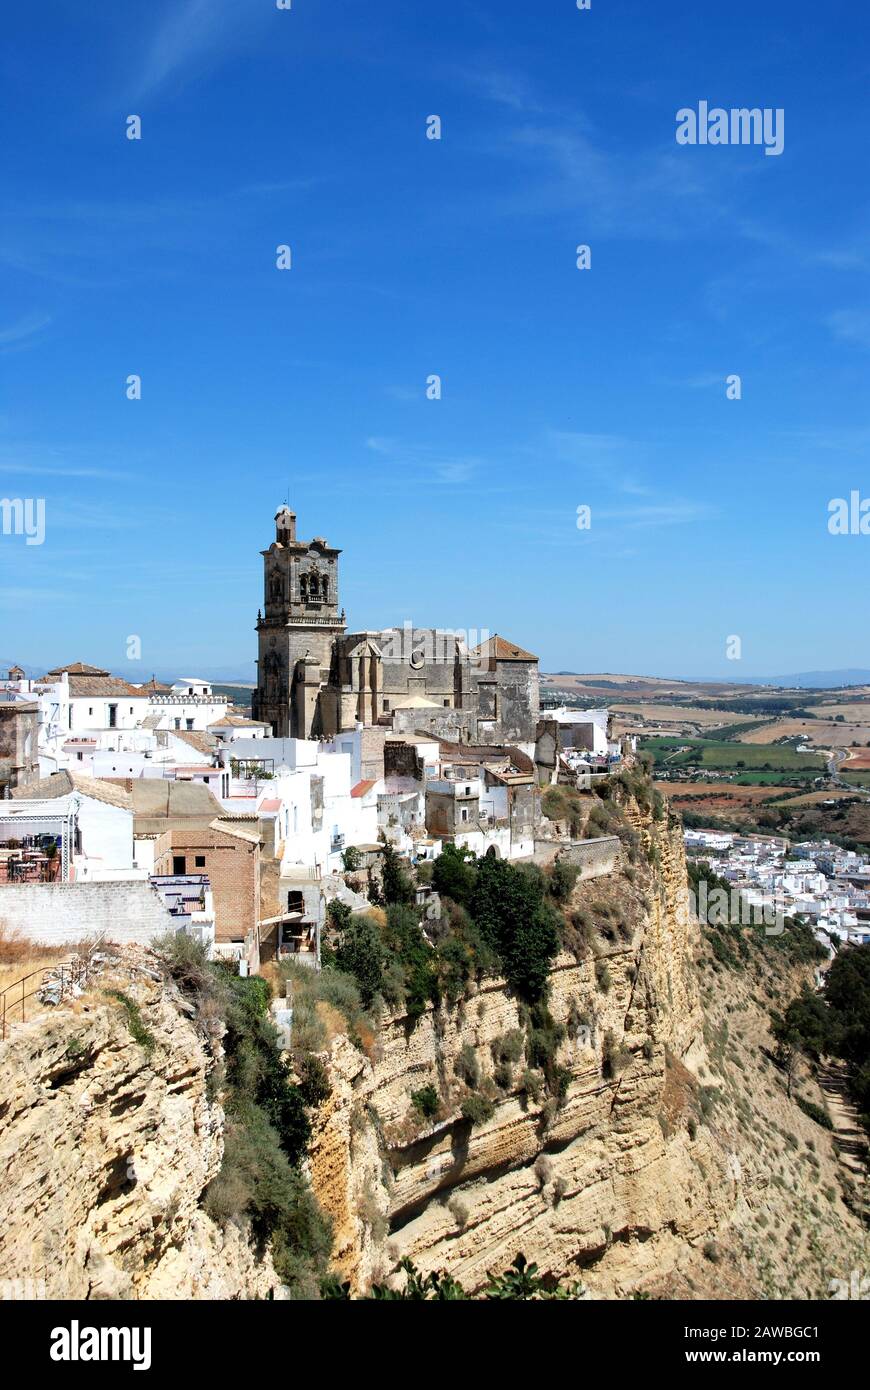 View of St Peters Church and town buildings, Arcos de la Frontera, Andalucia, Spain. Stock Photo